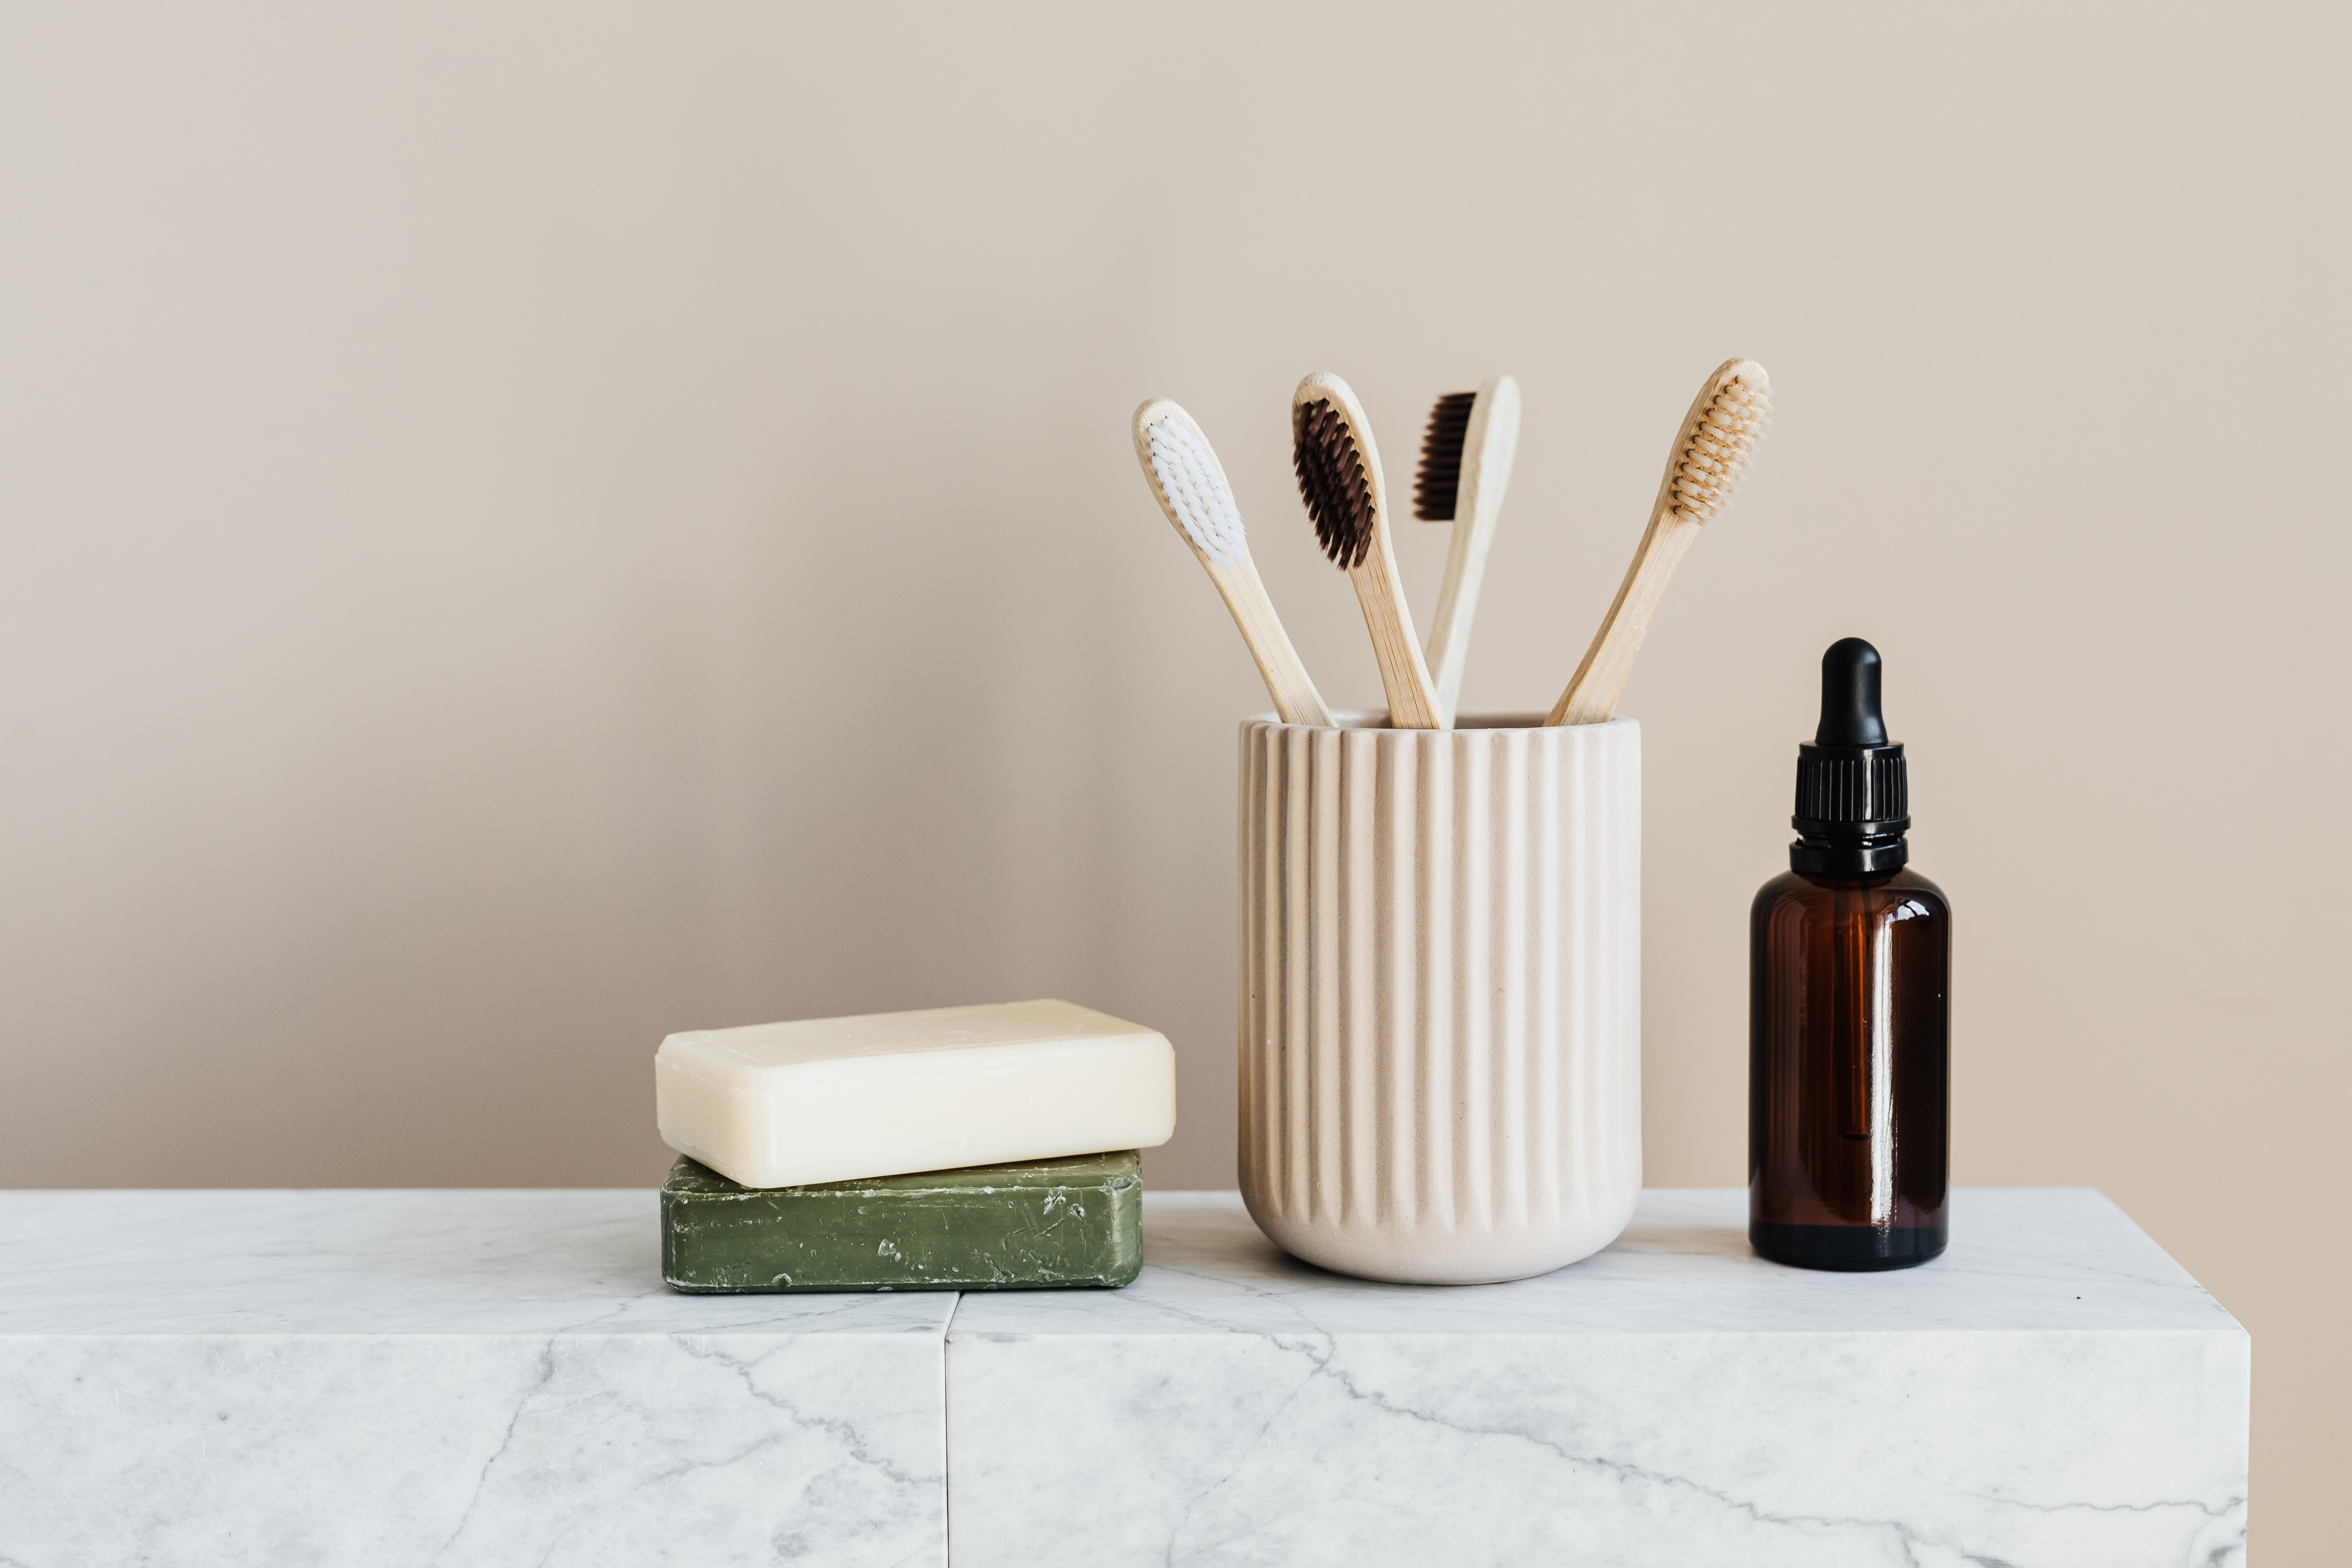 Free Collection of organic soaps and bamboo toothbrushes in ceramic minimalism style holder placed near renewable glass bottle with essential oil on white marble tabletop against beige wall